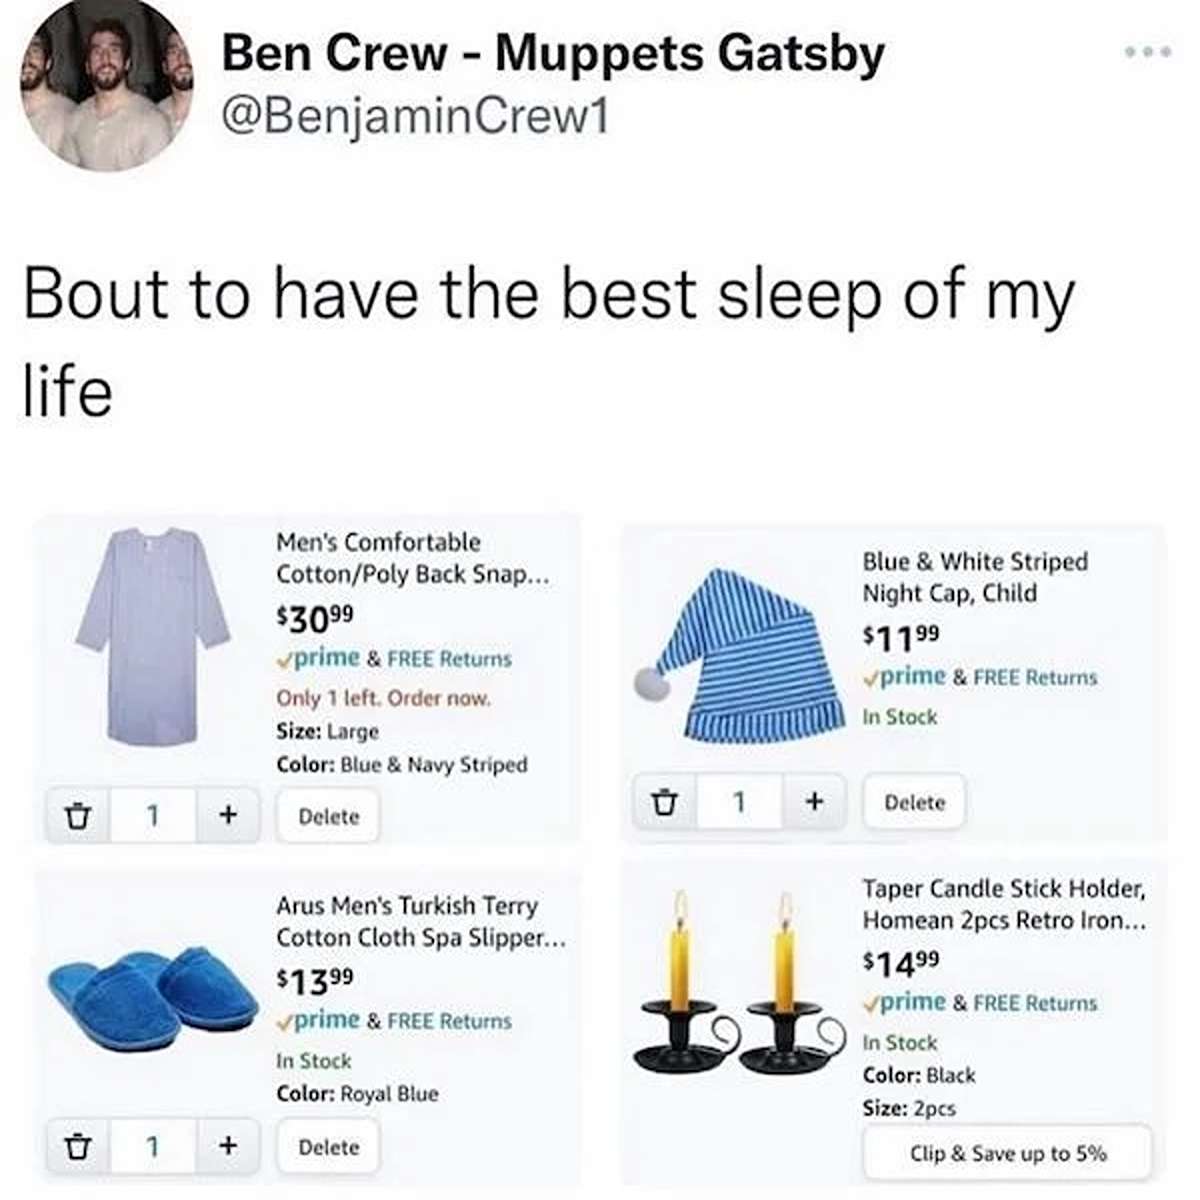 funny tweets and memes - diagram - Ben Crew Muppets Gatsby Bout to have the best sleep of my life Men's Comfortable CottonPoly Back Snap... $3099 prime & Free Returns Only 1 left. Order now. Size Large Color Blue & Navy Striped Delete 1 Arus Men's Turkish